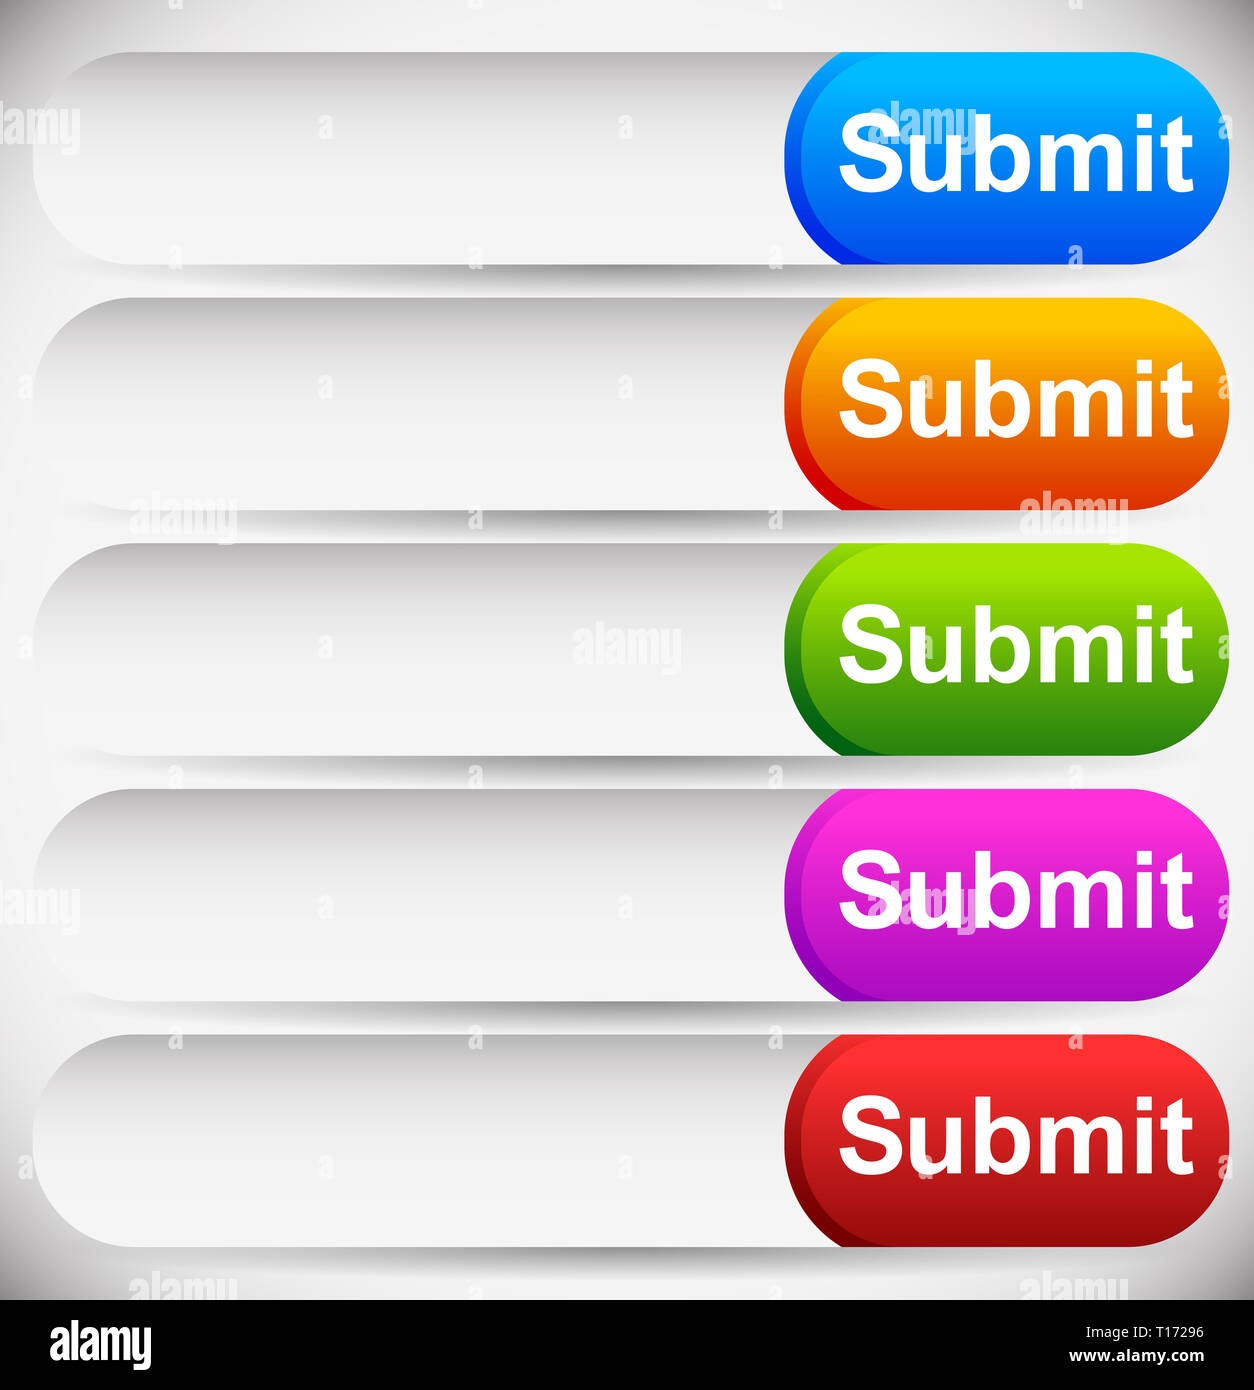 Eps 10 Vector Illustration Of Colorful Rounded Submit Buttons Text Input Fields Form Elements With Submit Button Elements For Ui Web Design Stock Photo Alamy